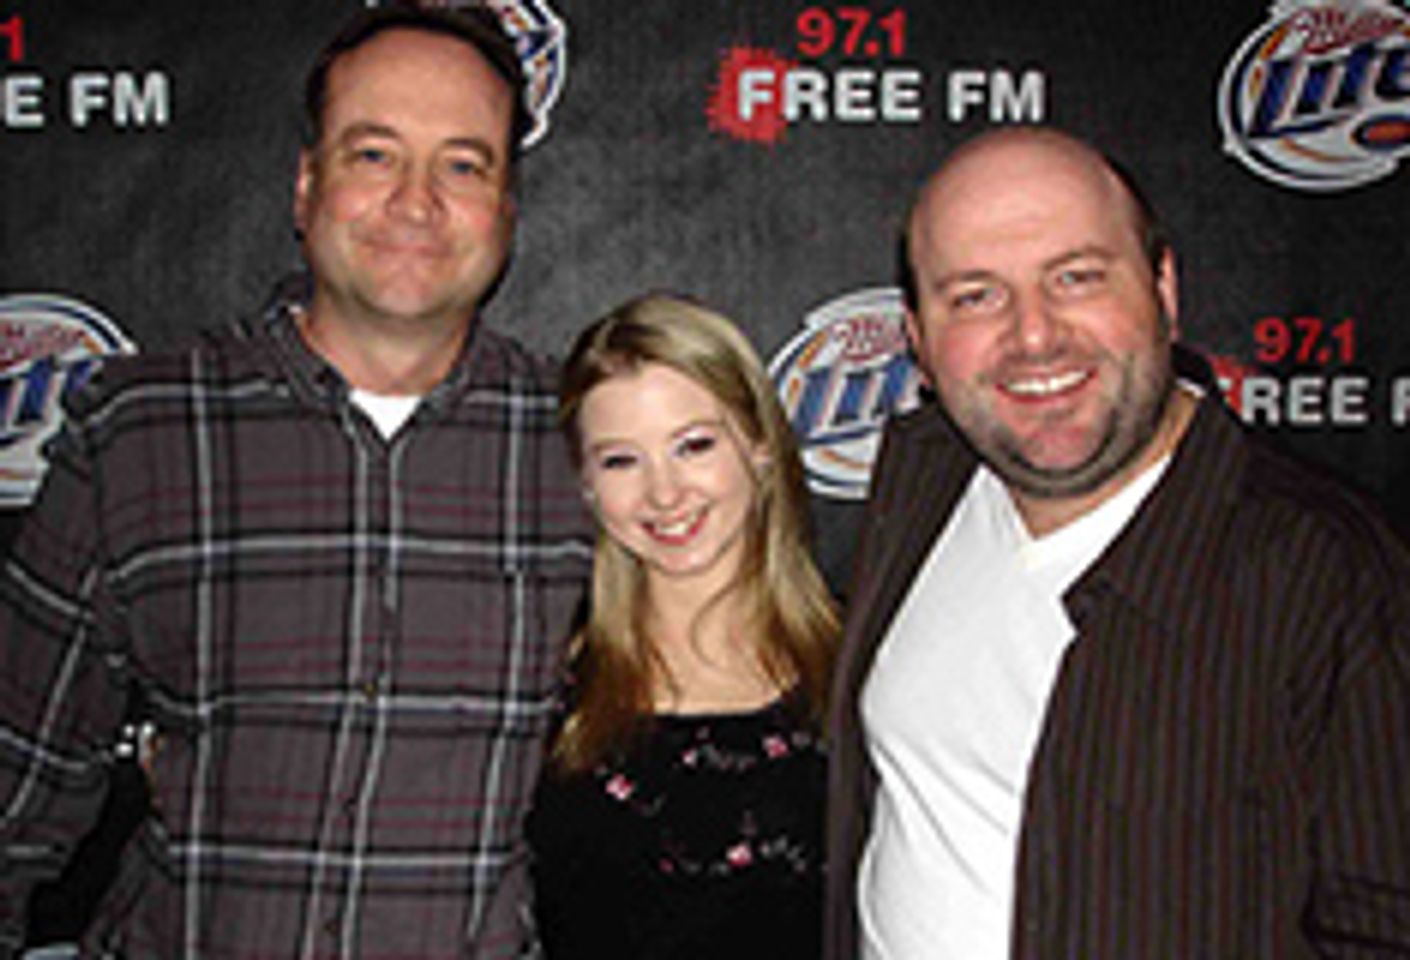 Sunny Lane Visits ‘Conway and Whitman’ Show